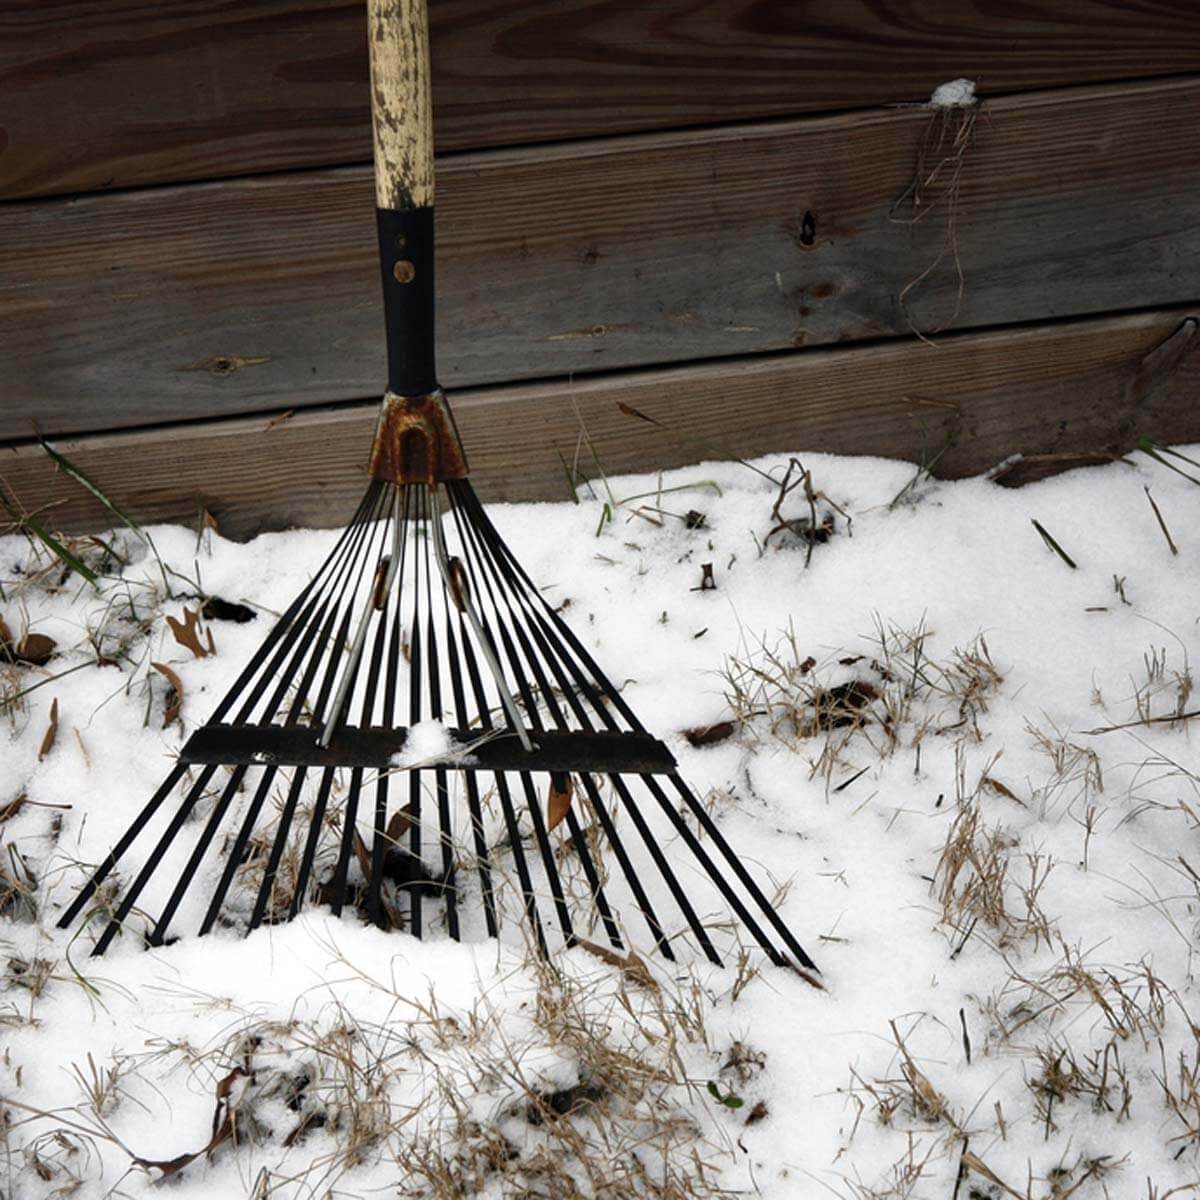 Is Your Lawn Ready for Winter? Here's What To Do